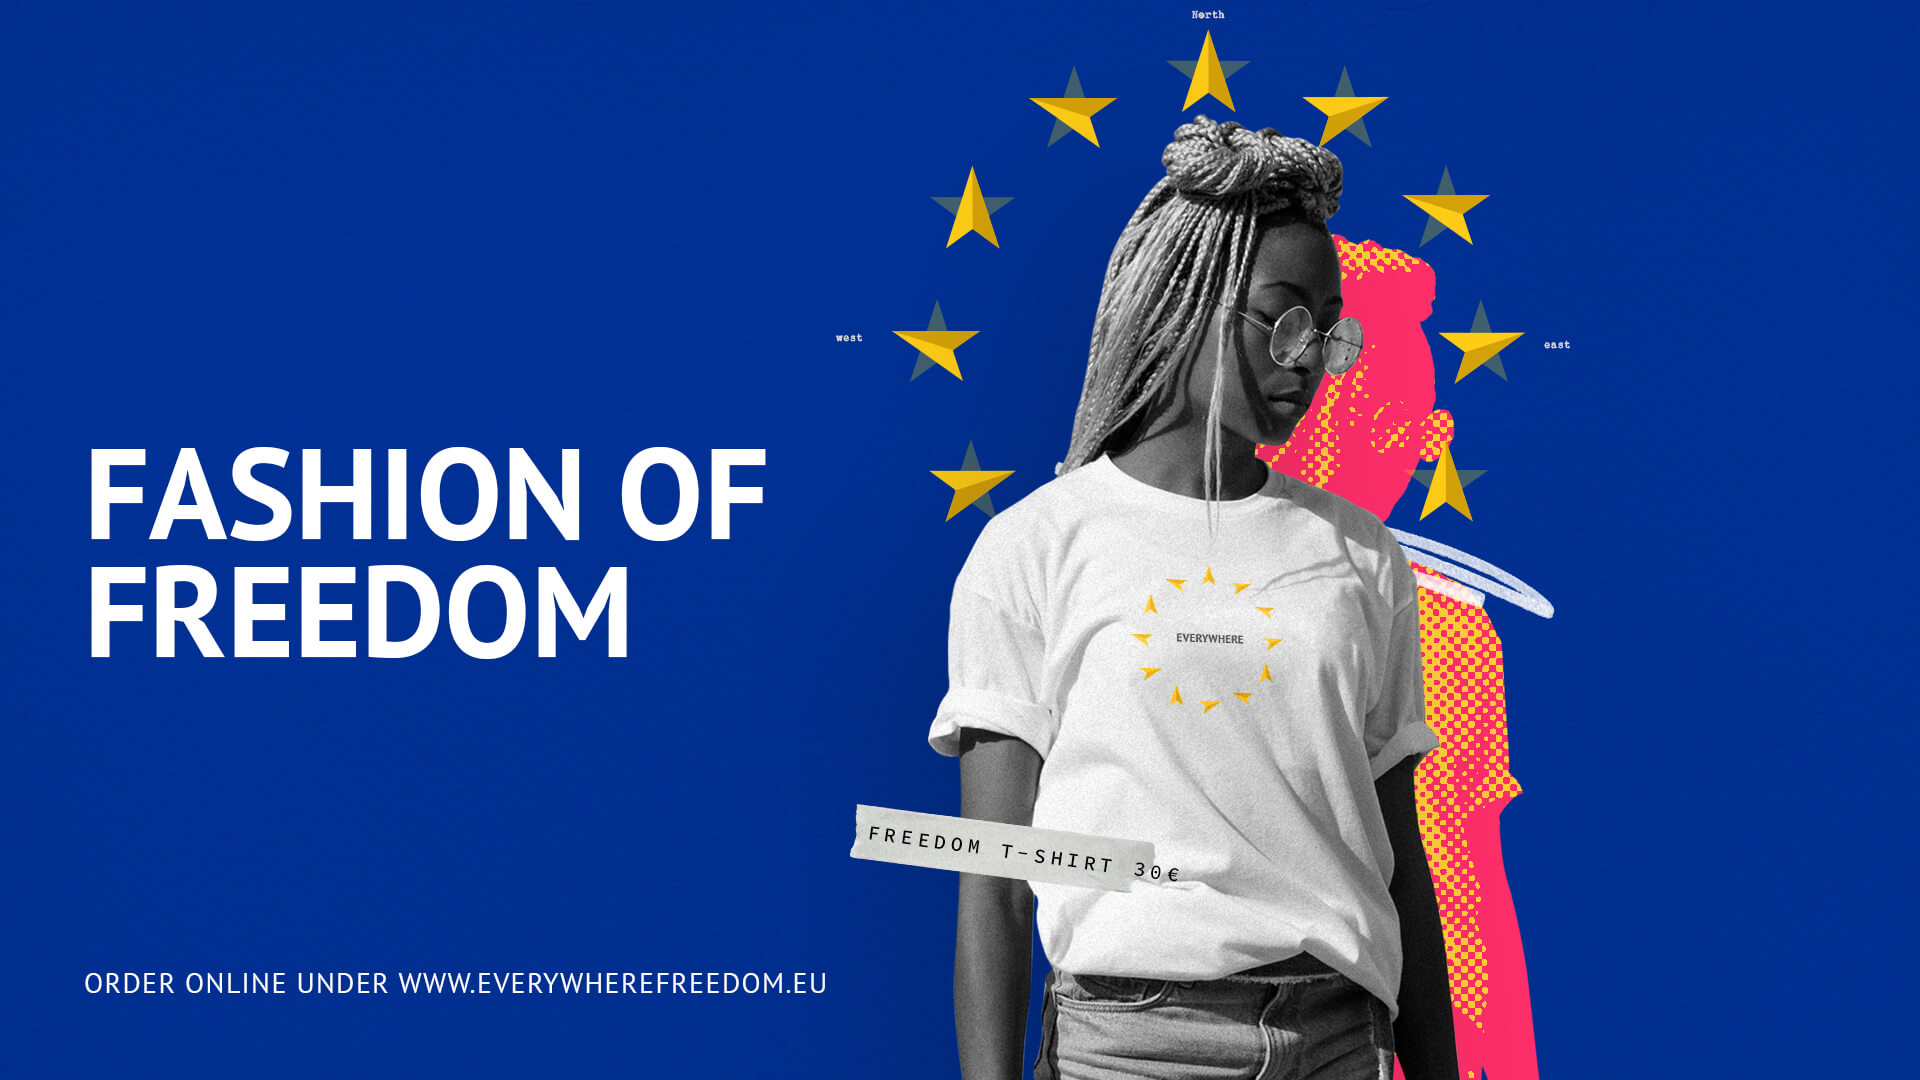 European Union Fashion Design of Freedom. Our Artwork printed on a t-shirt for our target group